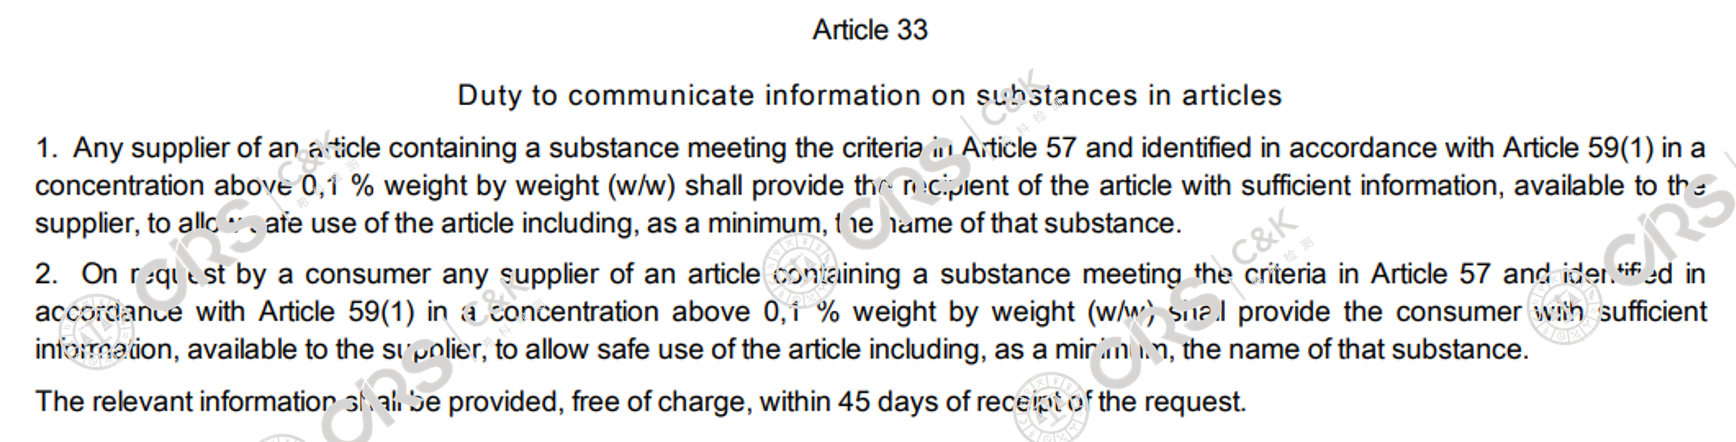 Article33